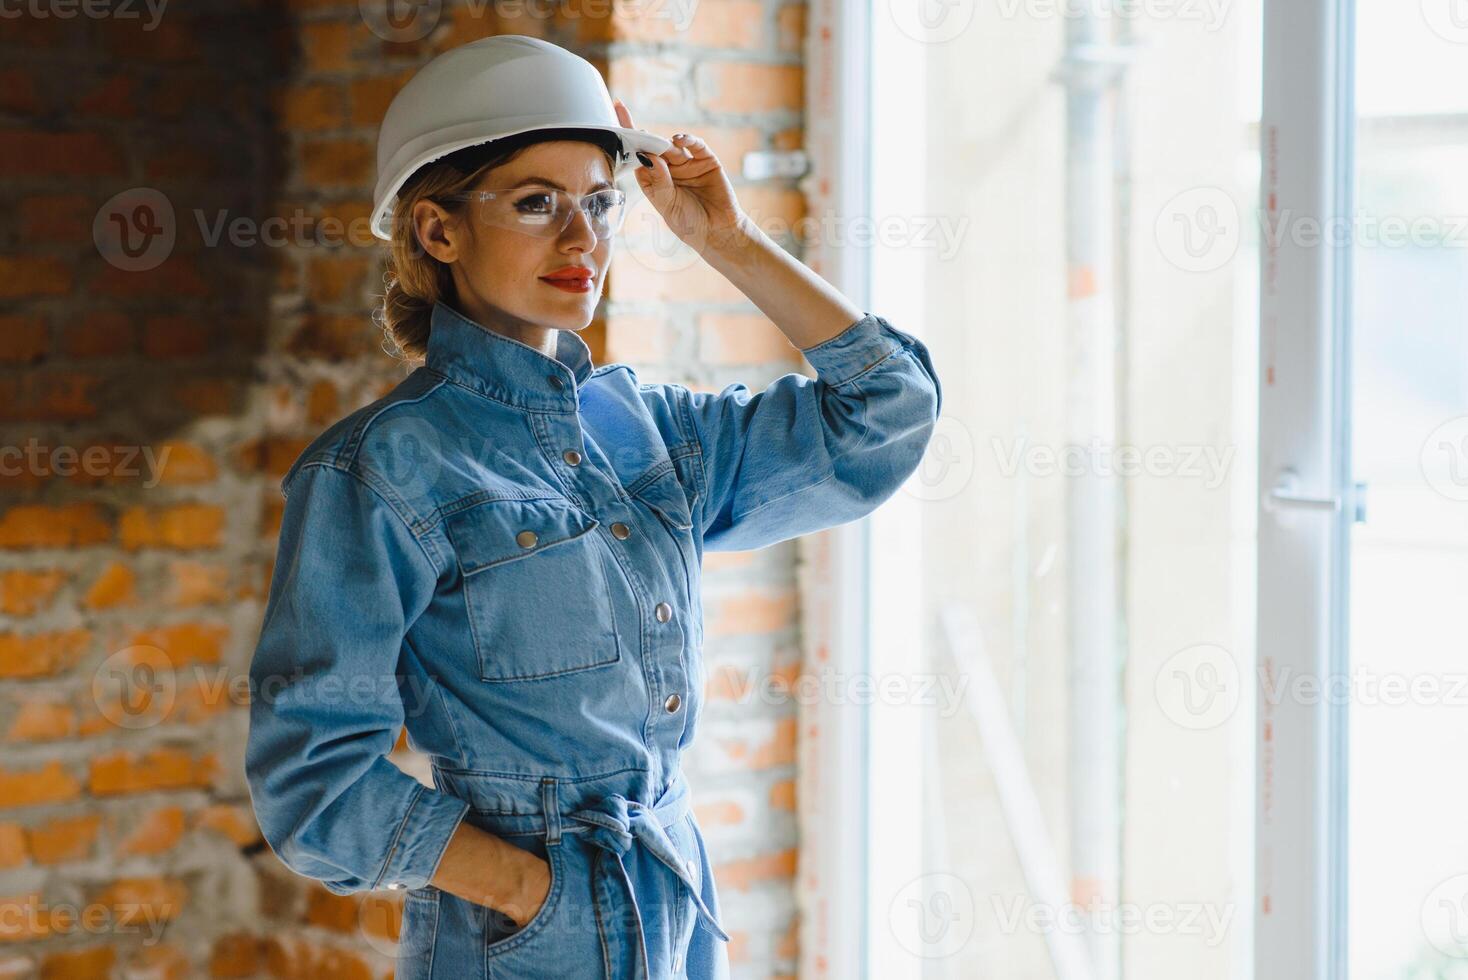 Attractive female construction worker in hardhat. Confident young specialist in checkered blue shirt in jeans standing in empty room. Interior design and renovation service photo